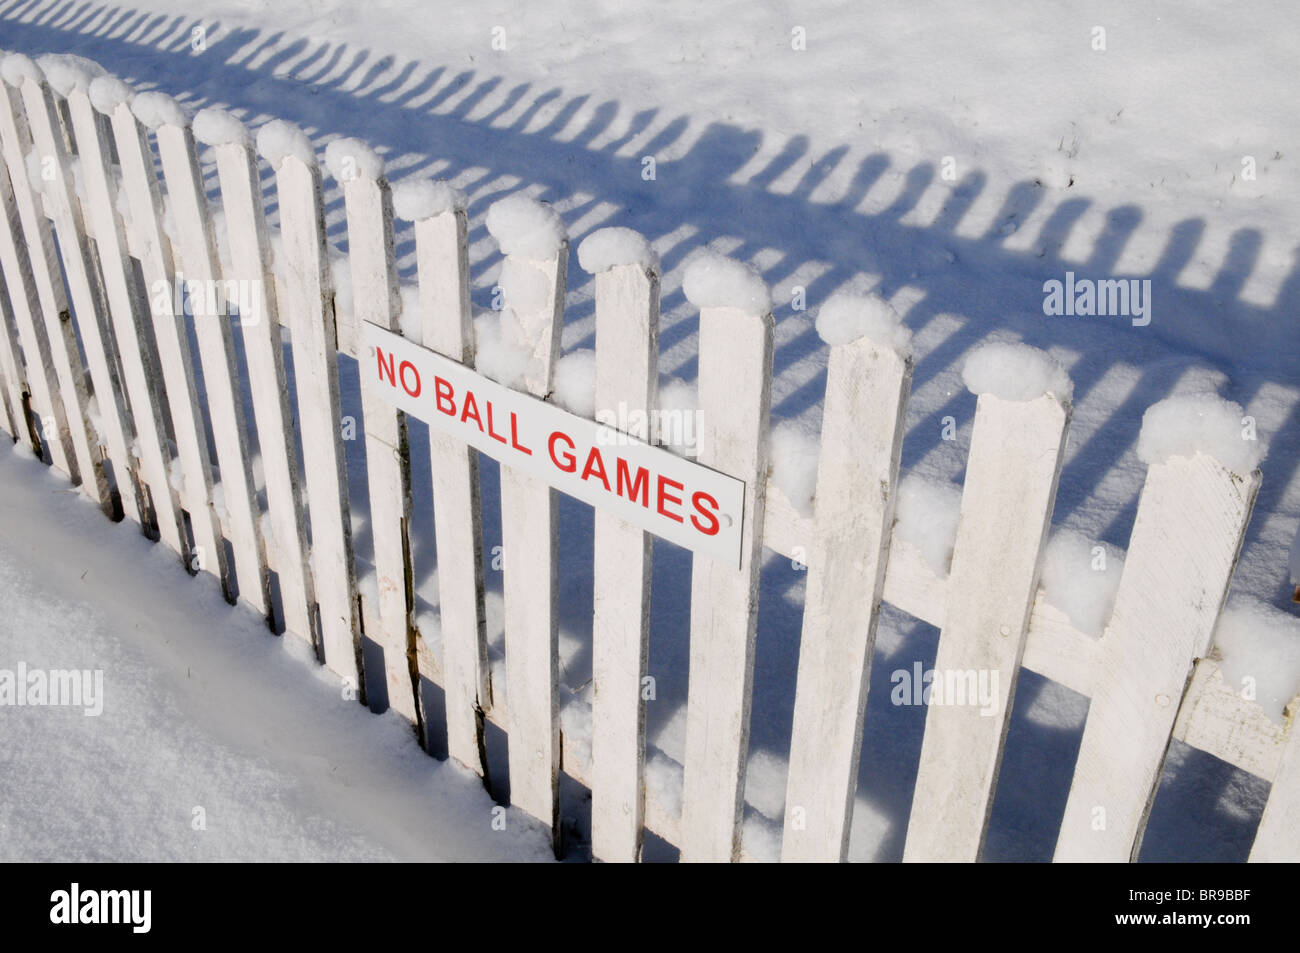 A red no ball games sign on a picket fence covered in snow at Wolverhampton Cricket Club Stock Photo